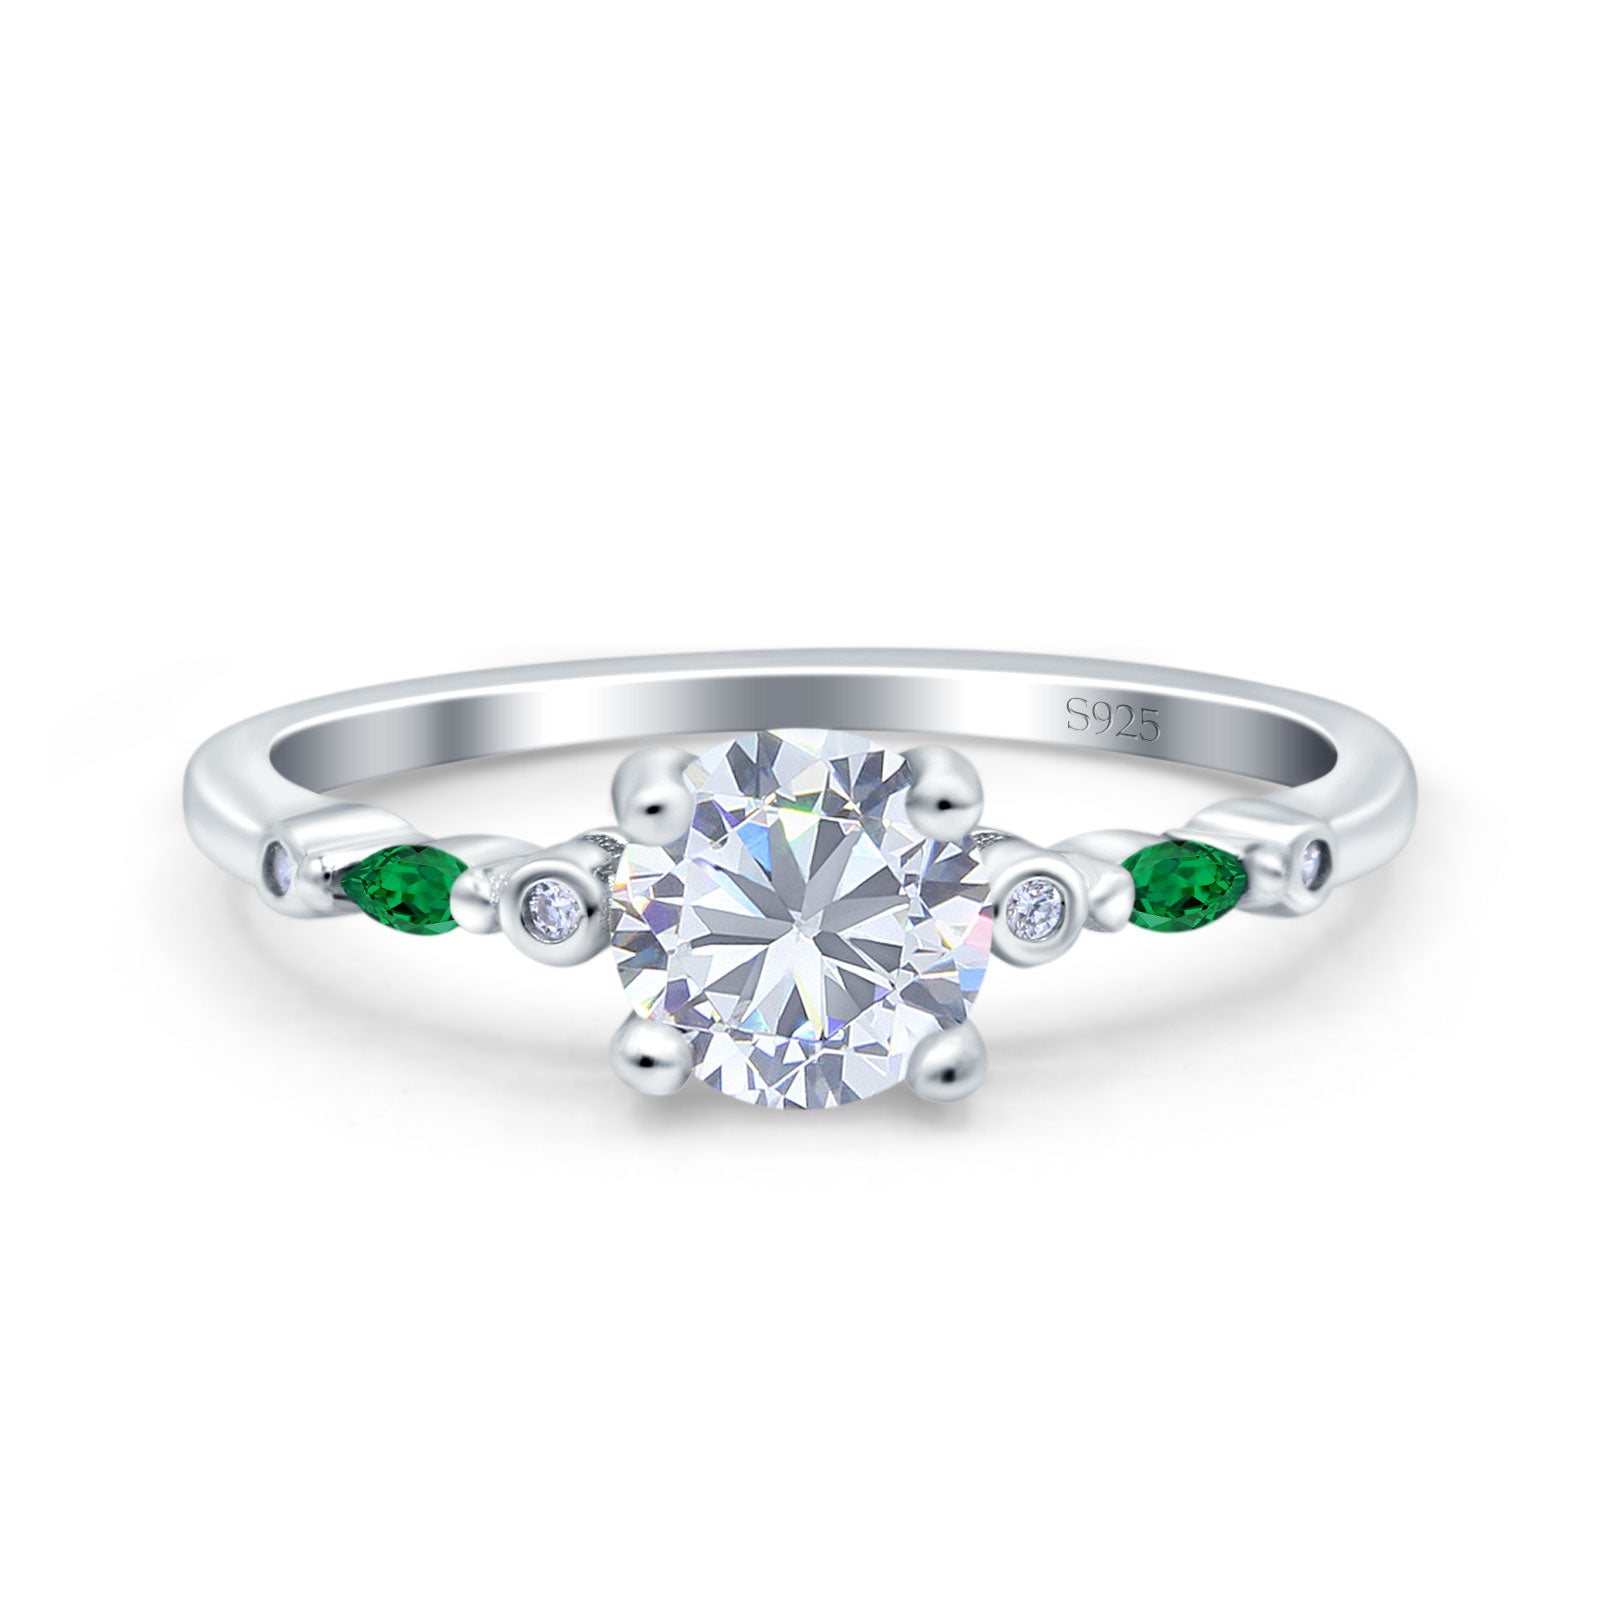 Vintage Style Round Bridal Wedding Ring Marquise Green Emerald Simulated Cubic Zirconia 925 Sterling Silver